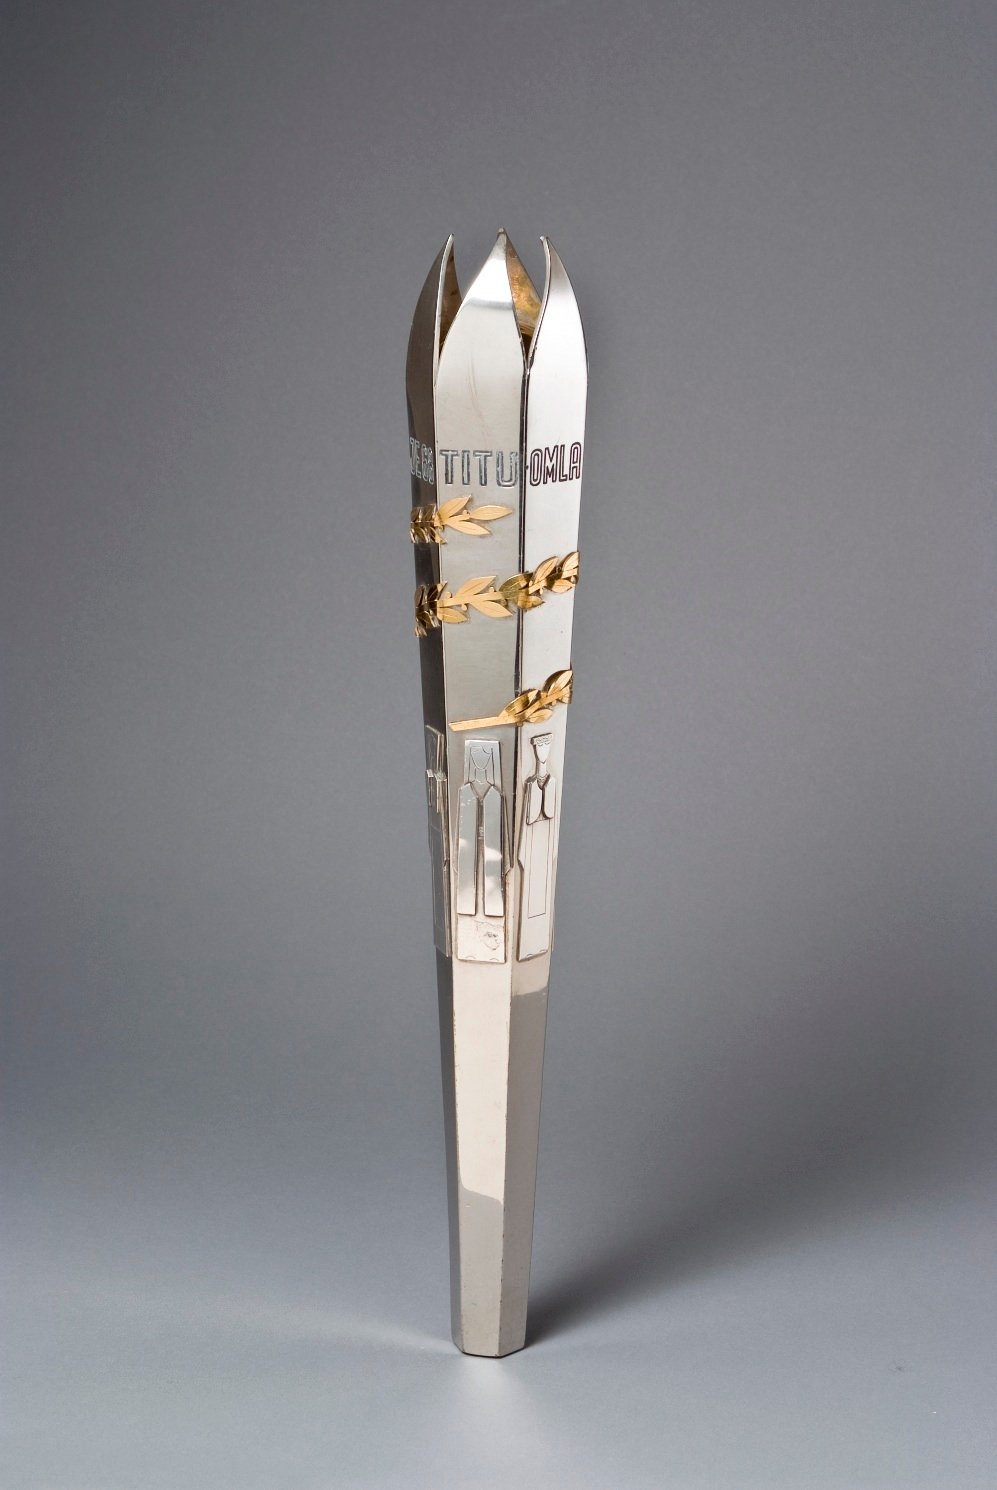 Federal baton, 1968. (Nickle brass, silver, gold gilt and glass) Museum of the History of Yugoslavia, Belgrade